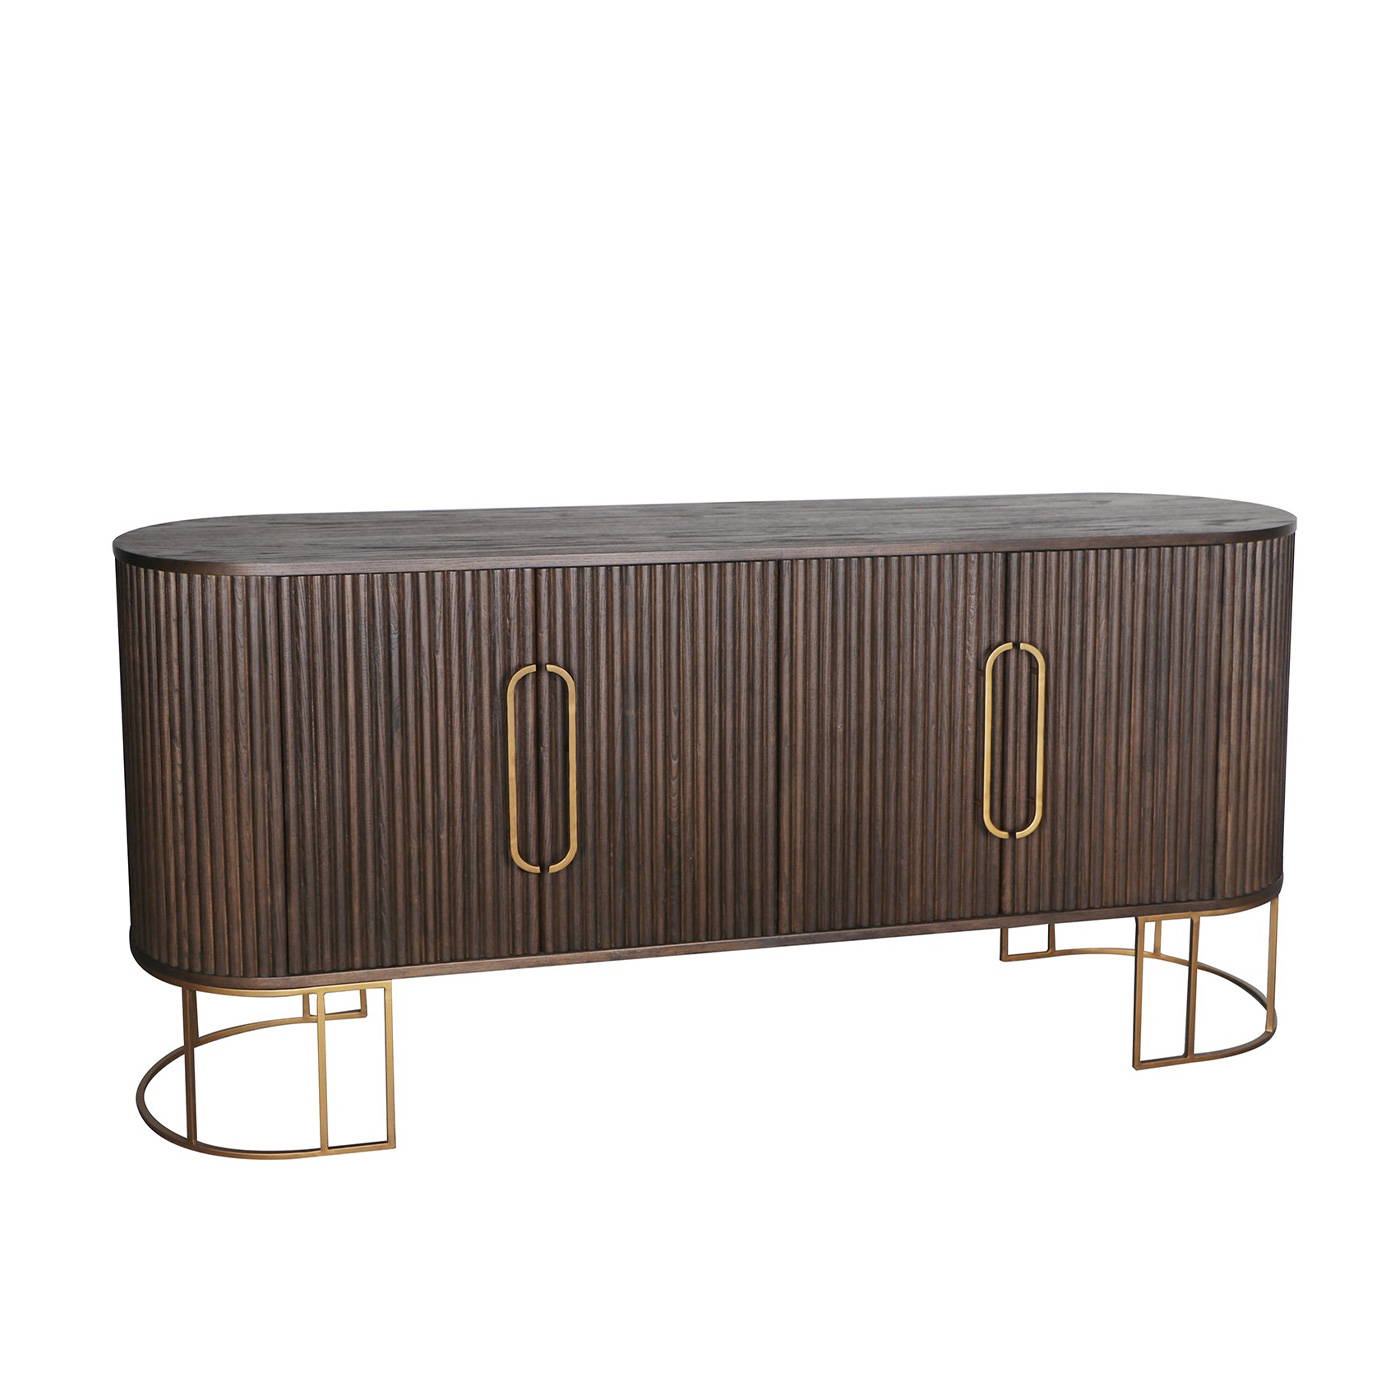 Storage For Your Dining Room Or Lounge - Shop Our Sideboard Collection At BF Home